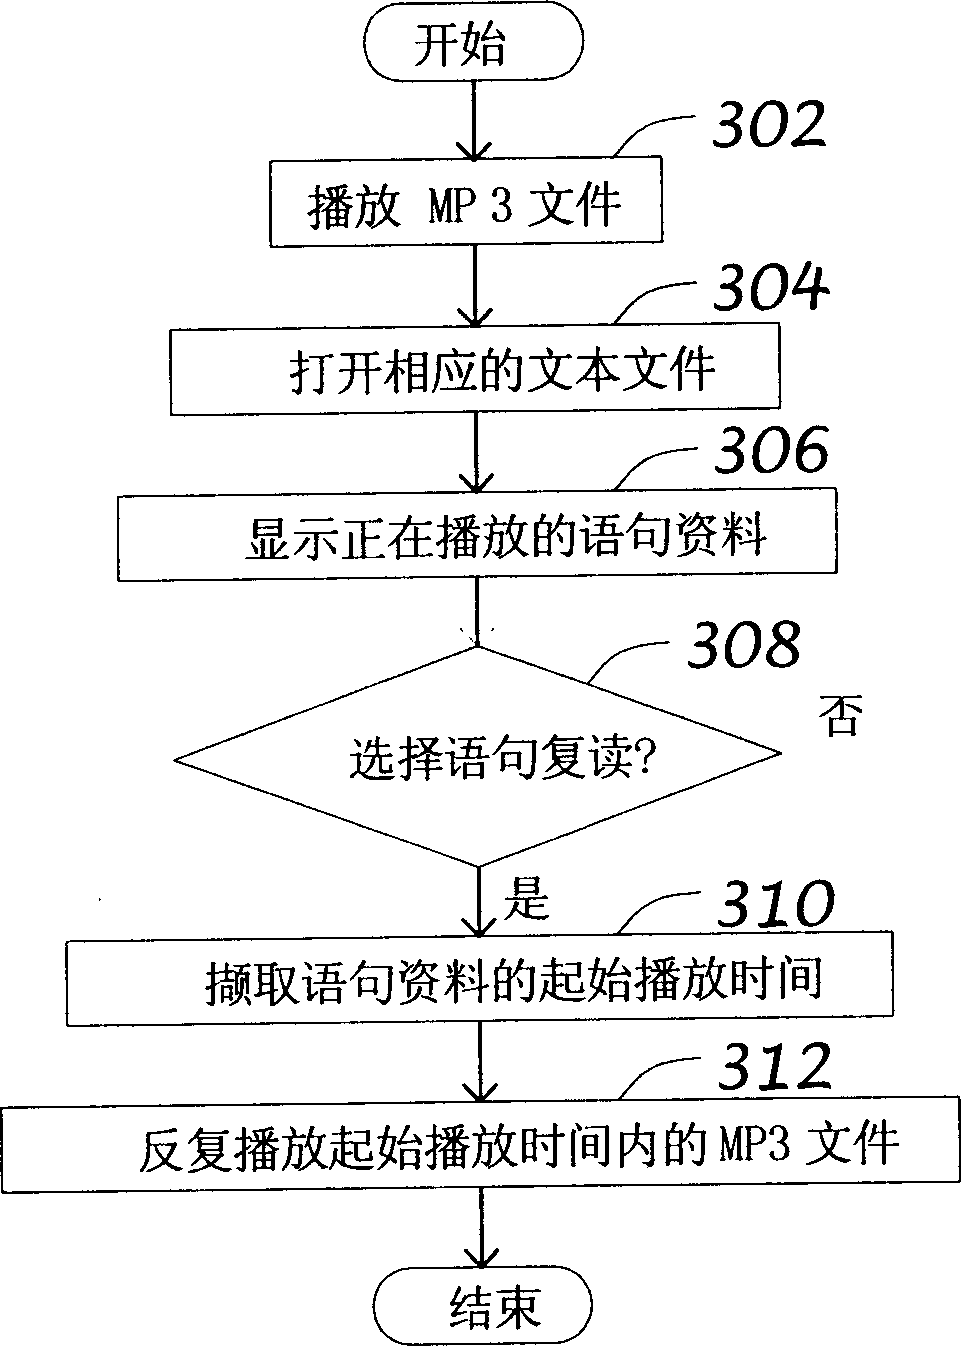 Mobile communication device with record function